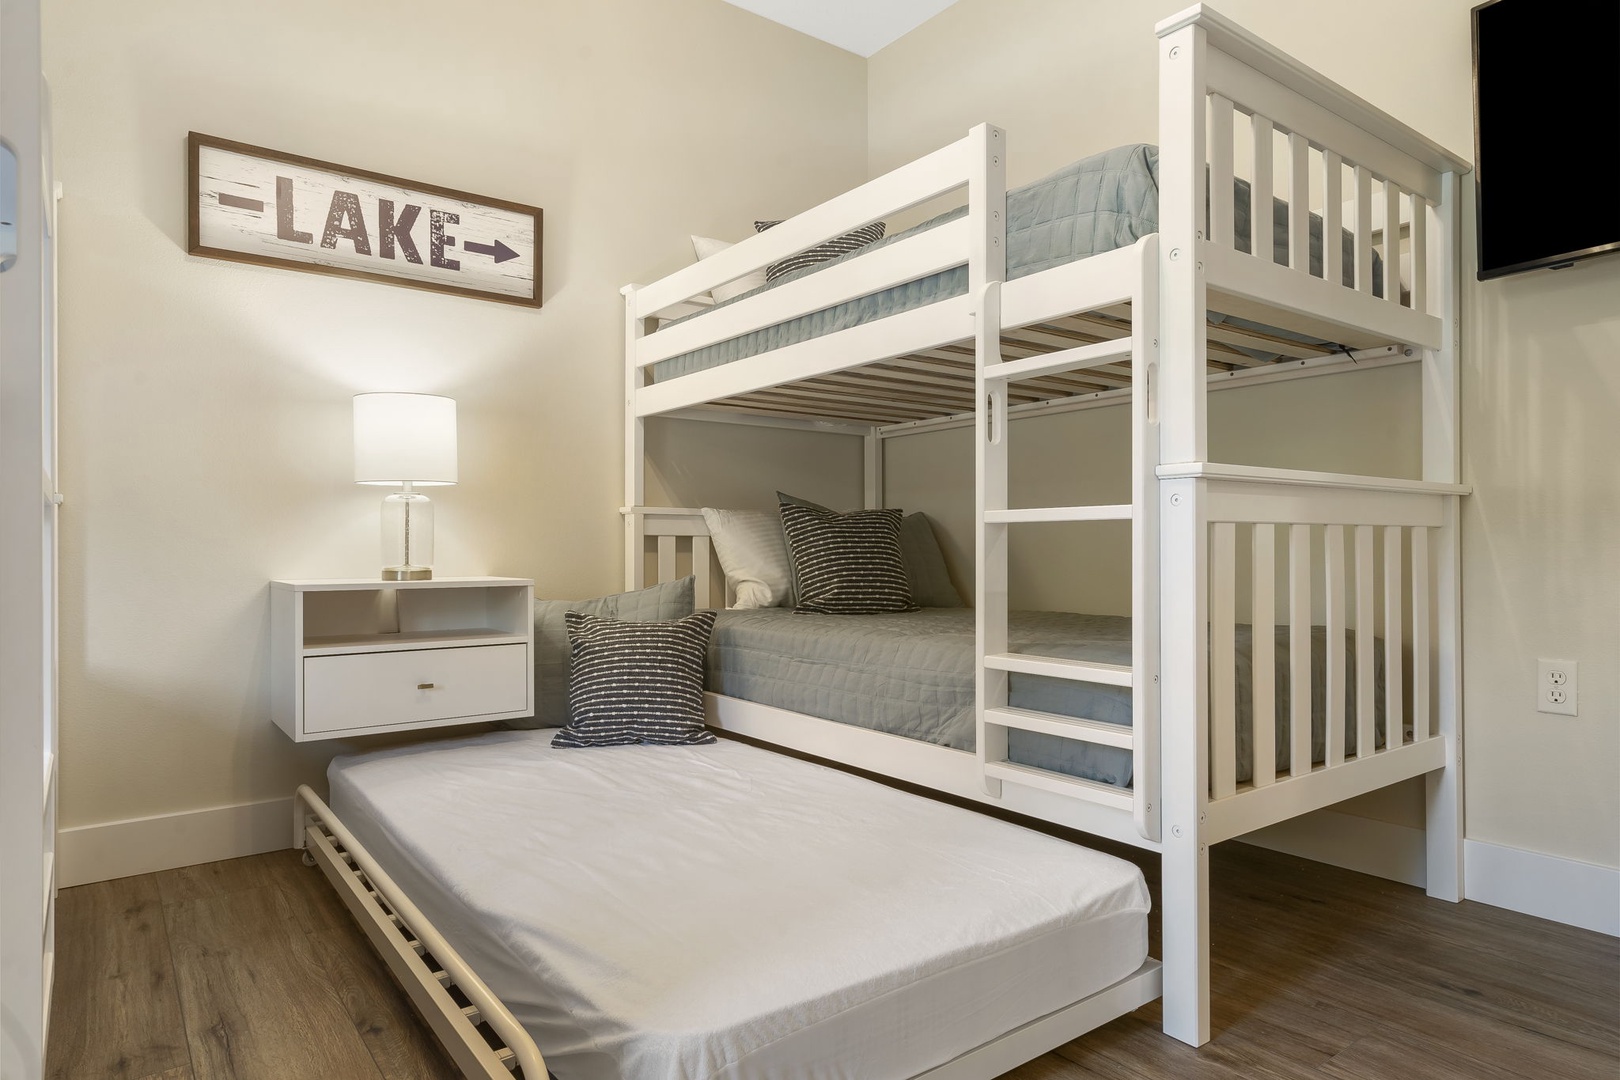 An additional Twin Trundle is tucked away in the Bunk Room, which offers sleeping space for 5